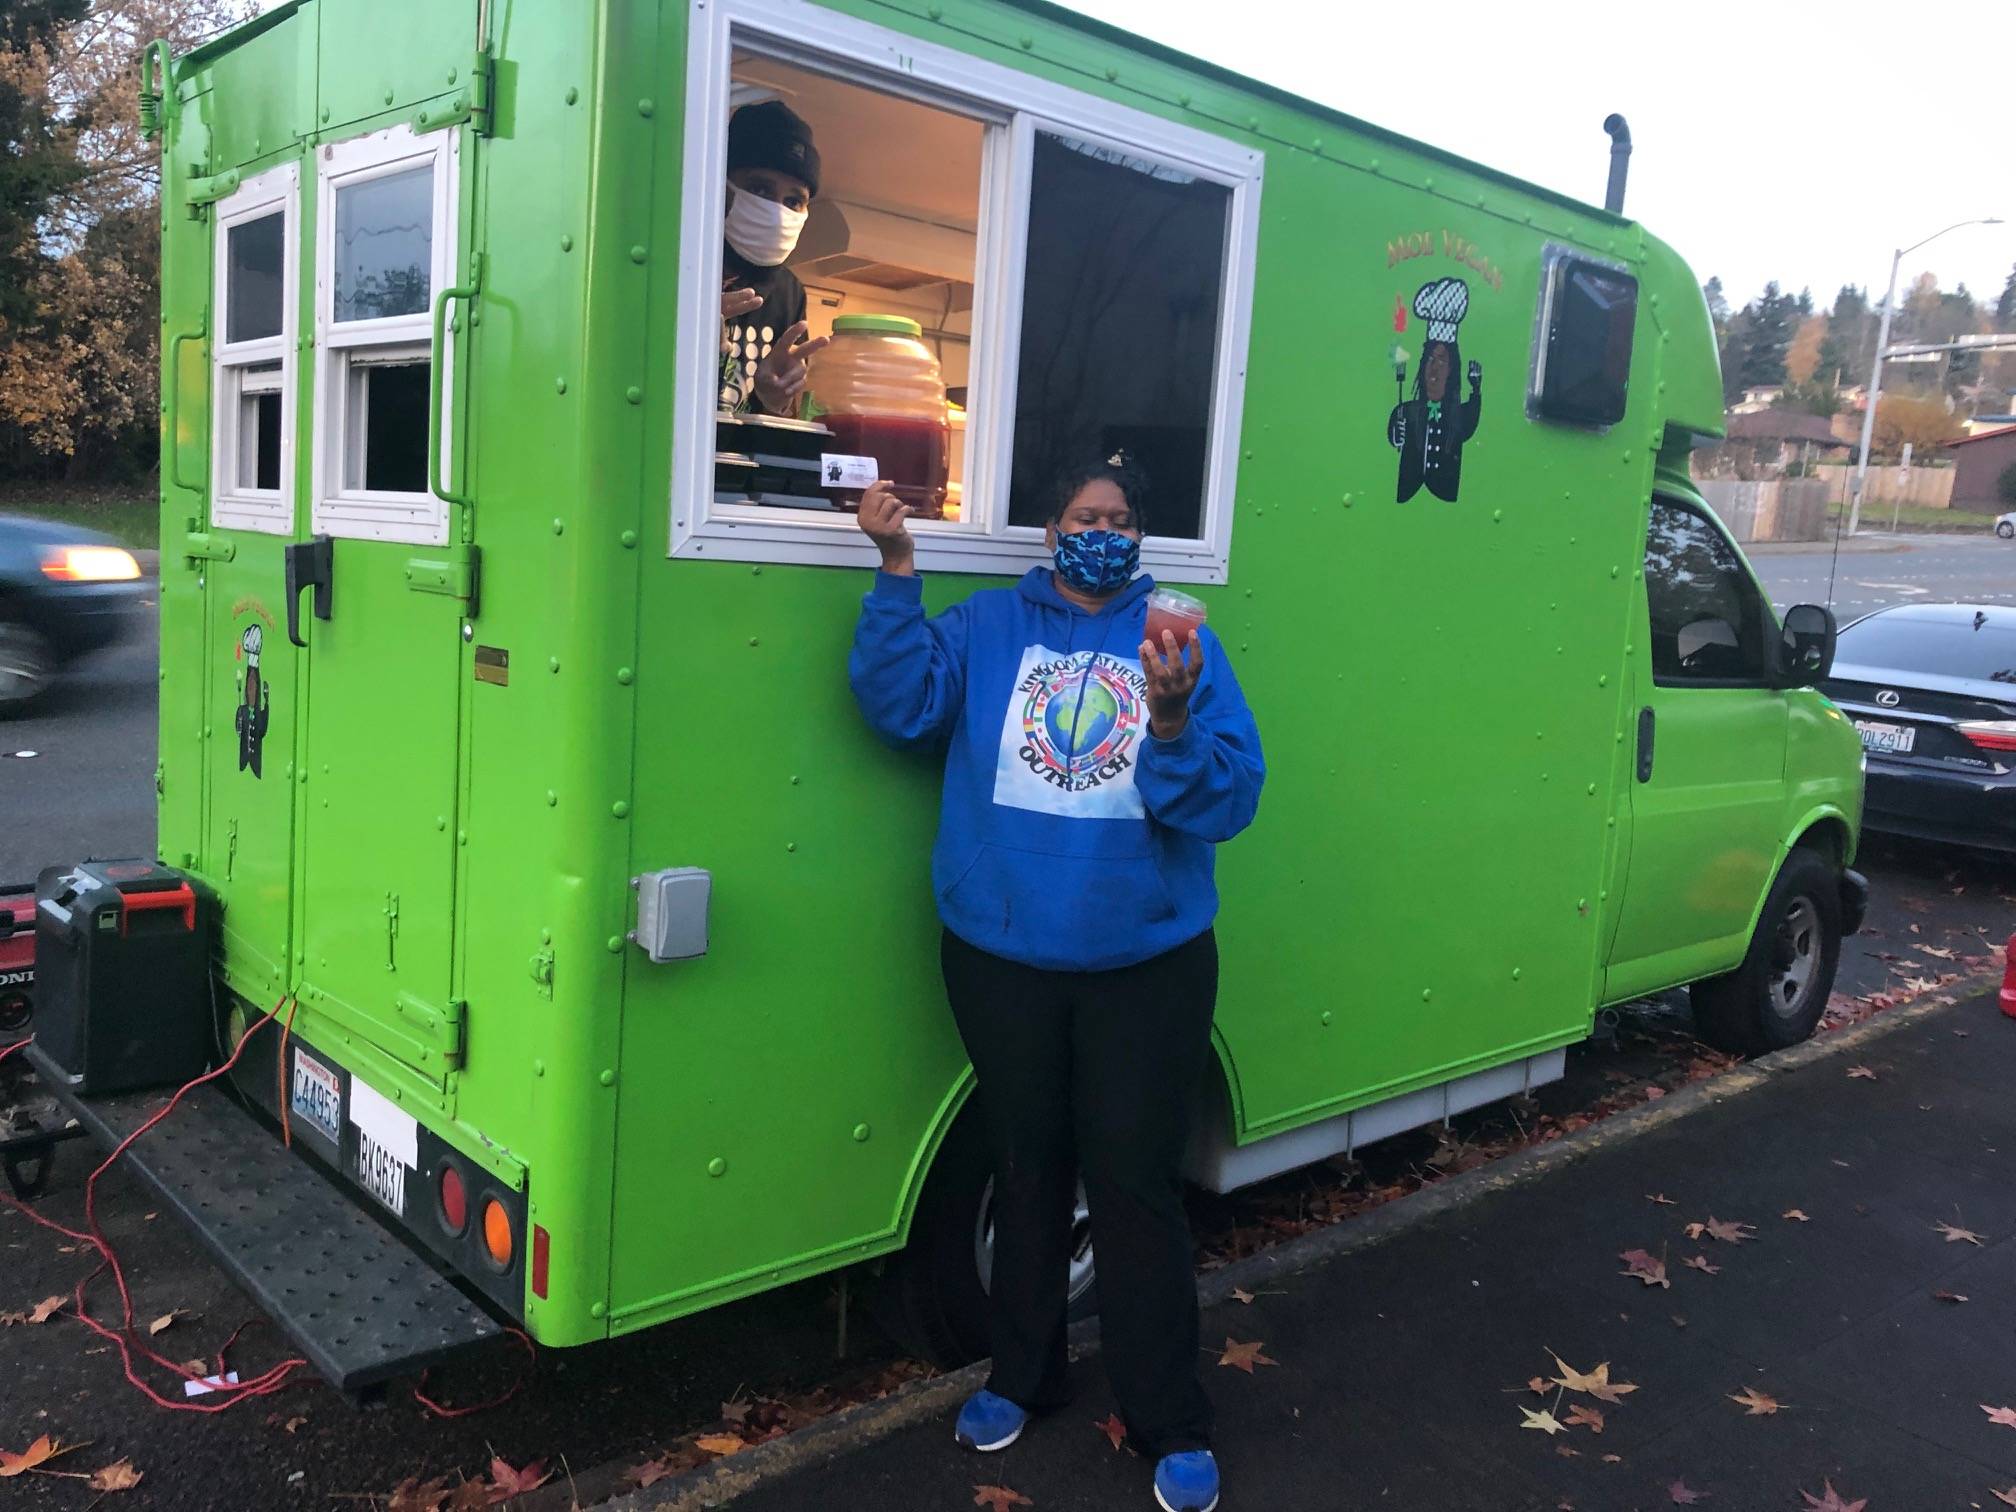 The Moe Vegan food truck serves meals at the city of Kent’s annual Community Thanksgiving Dinner on Nov. 21, 2020. Sound Publishing file photo